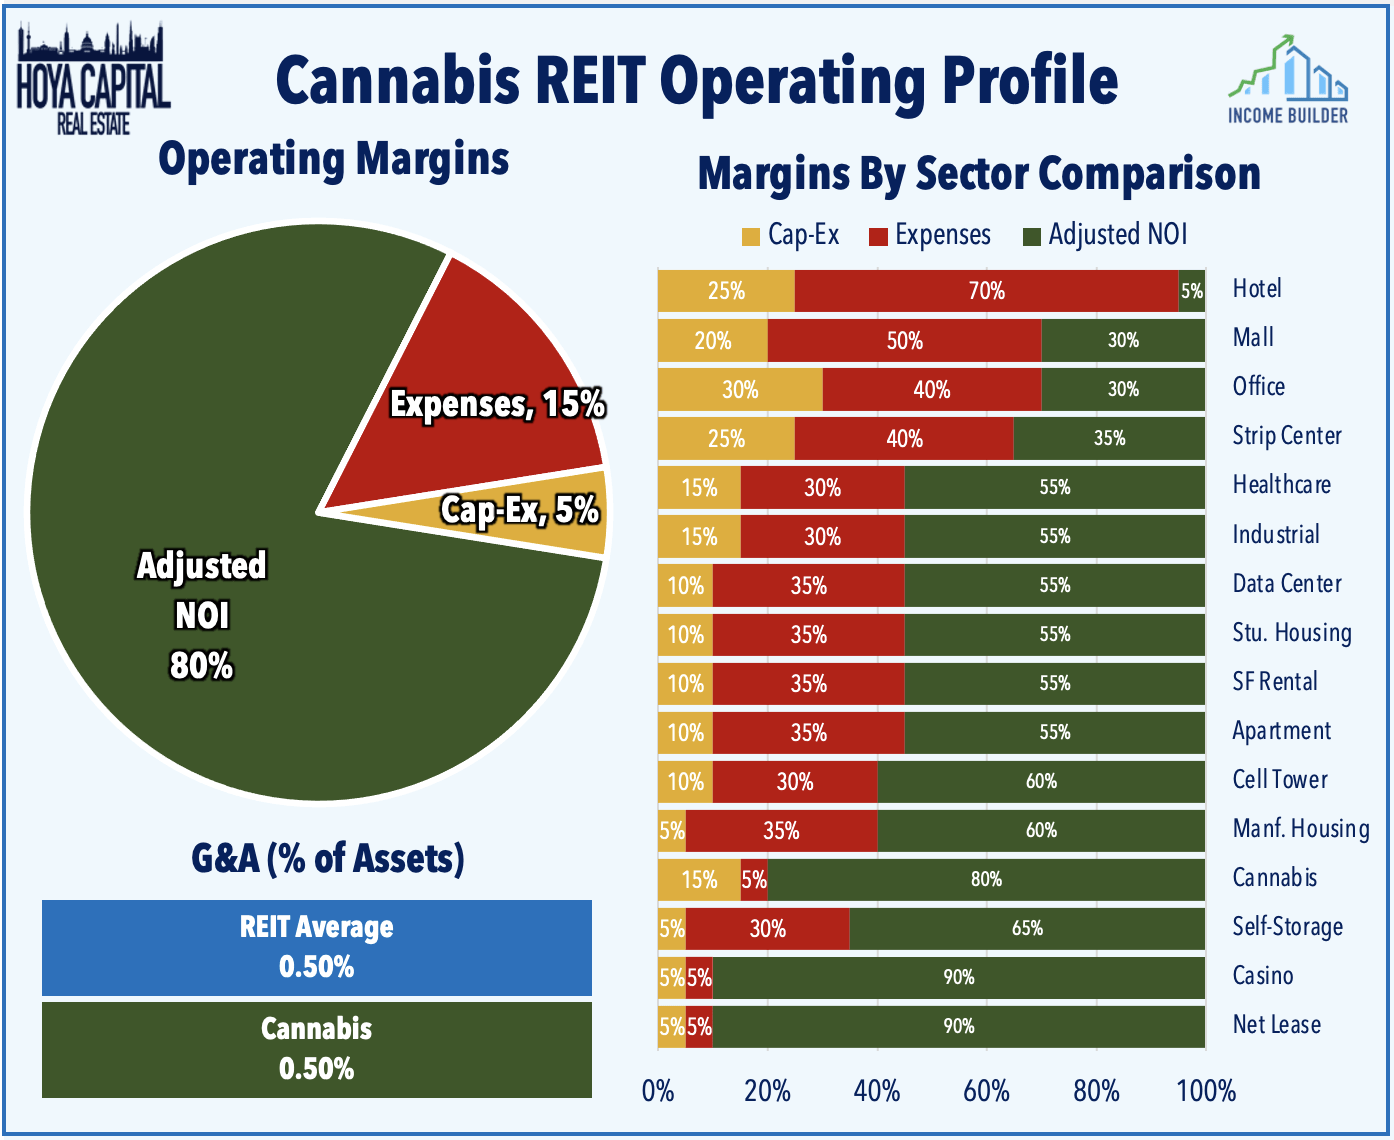 comparison of various REIT sectors, showing only Casino and Net Lease REITs have higher operating margins that Cannabis